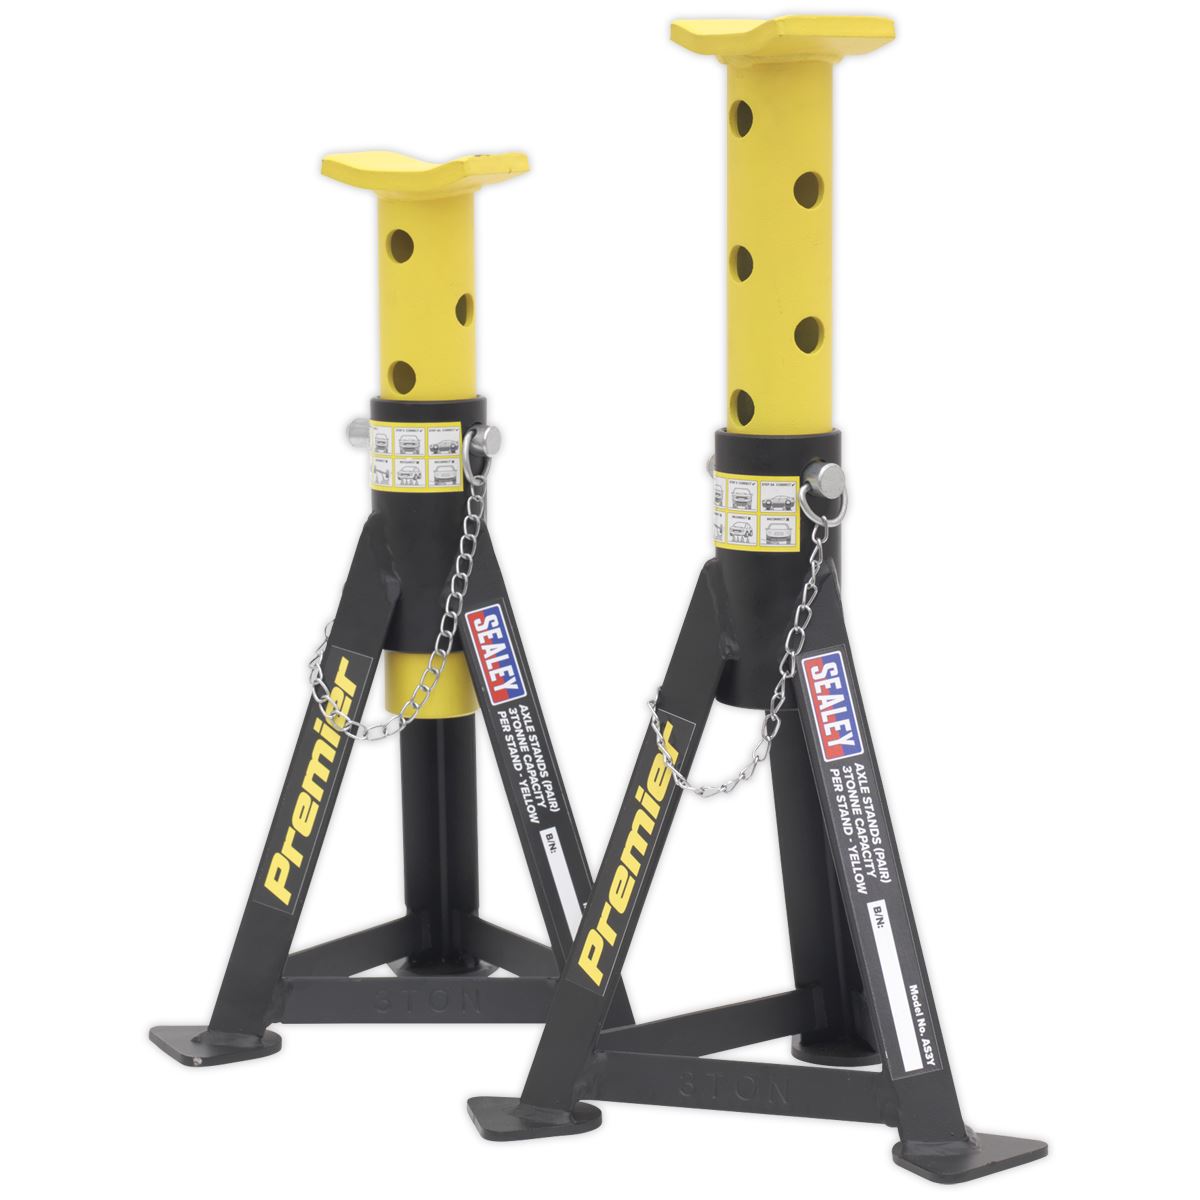 Sealey Premier Axle Stands (Pair) 3 Tonne Capacity per Stand - Yellow